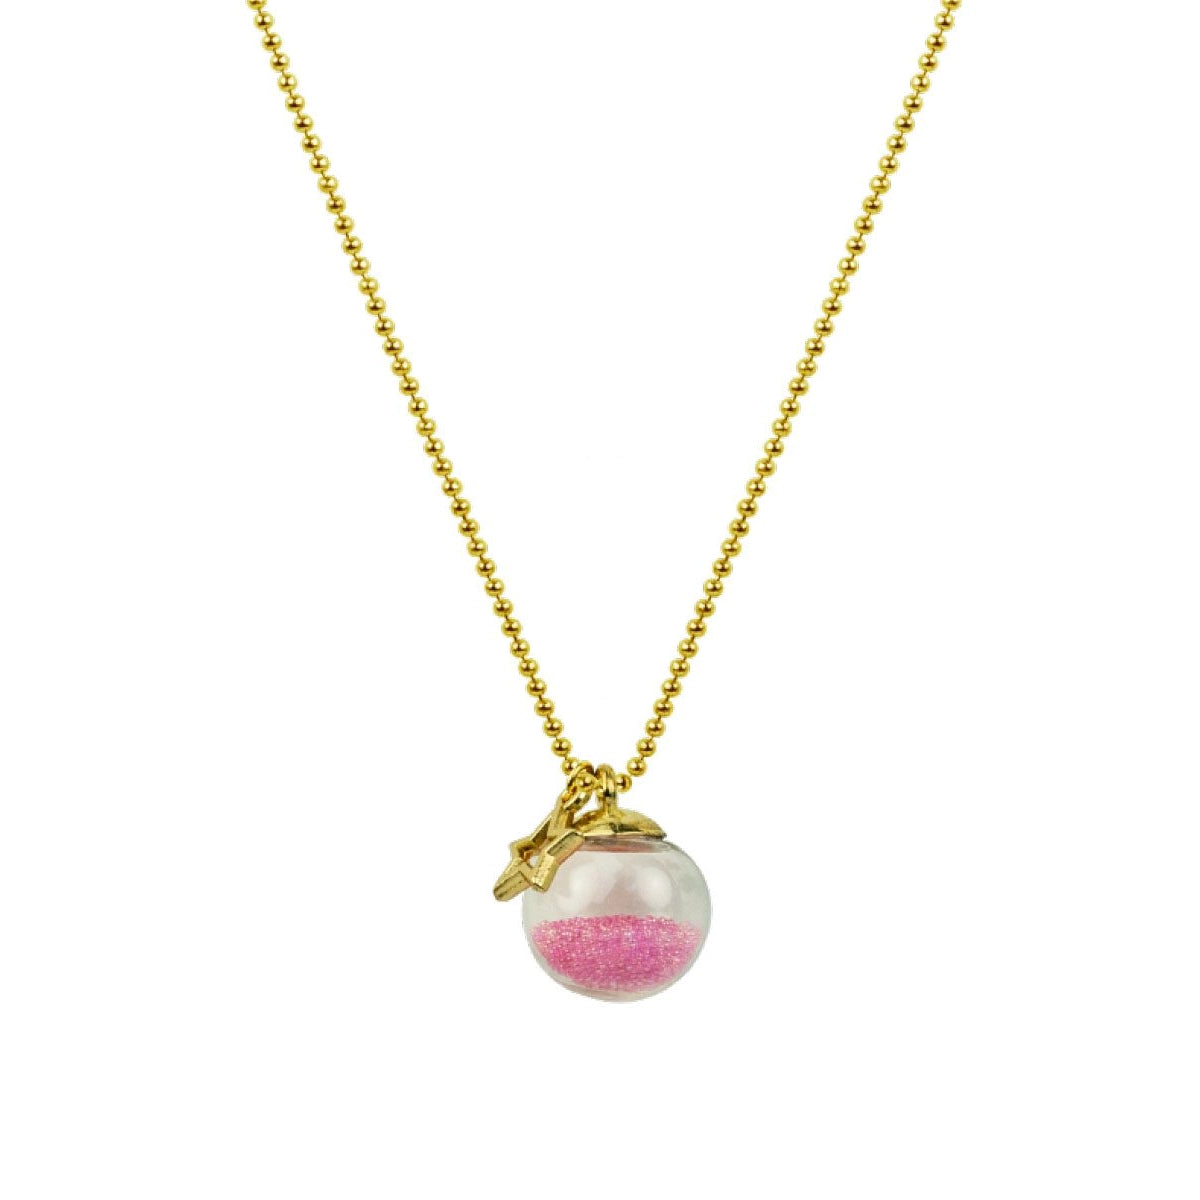 Shake it Up Crystal Ball Kids Necklace